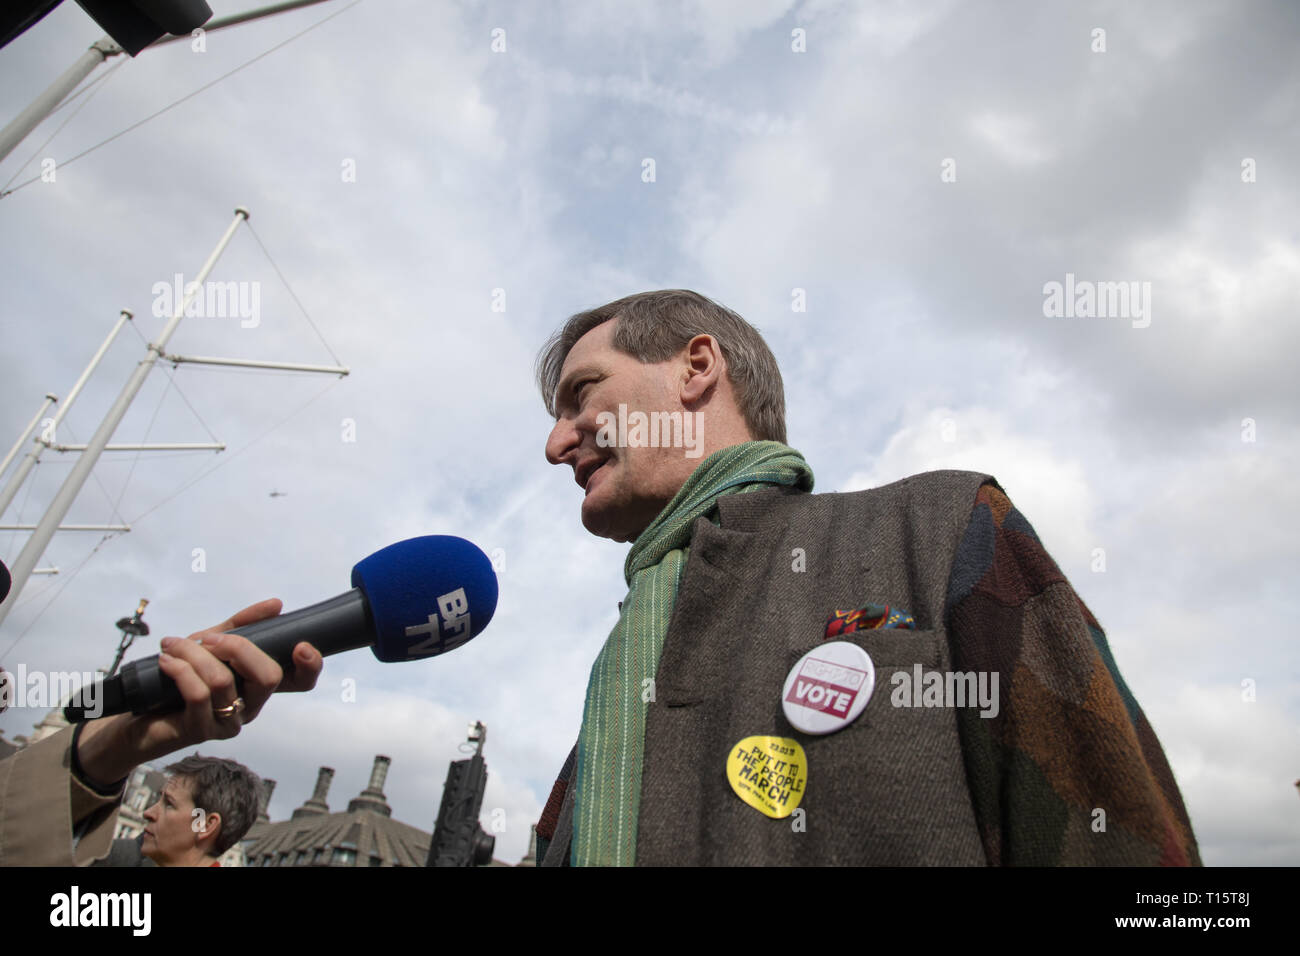 London, UK. 23rd Mar, 2019. Dominic Grieve conservative MP is interviewed outside Parliament Square, Westminster. Credit: Santo Basone/Alamy Live News Stock Photo